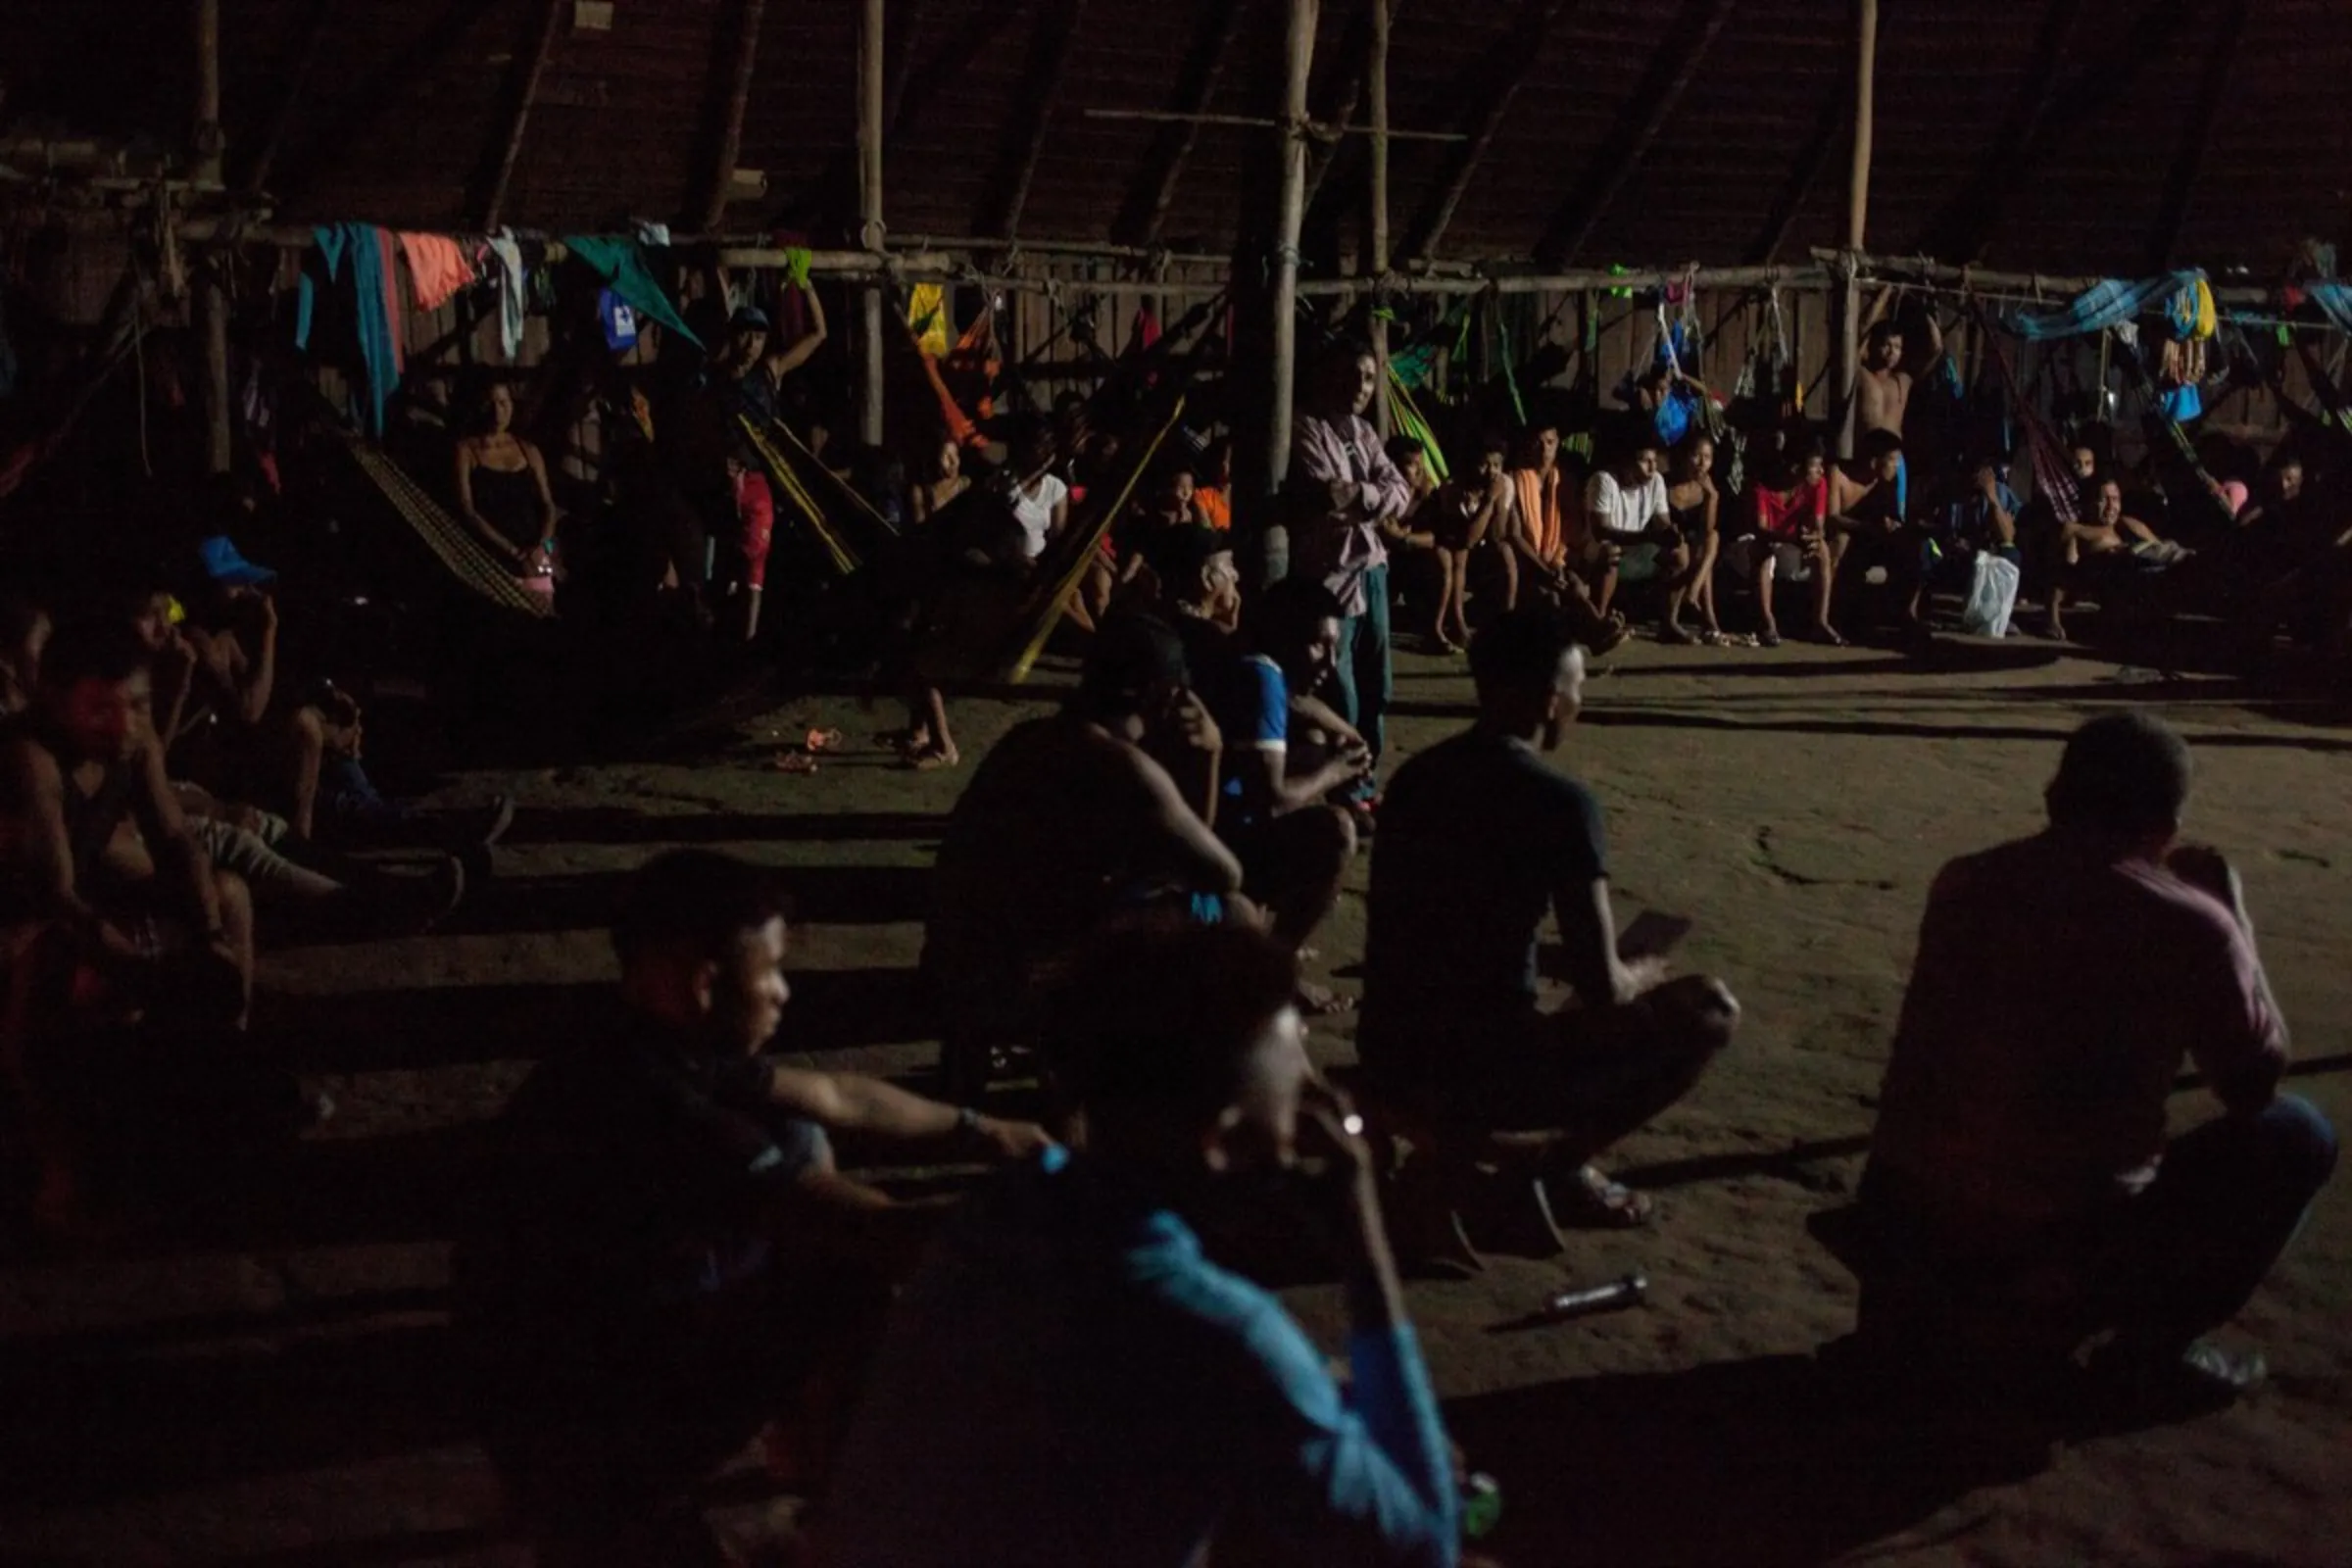 Indigenous people gather in a maloka – a traditional thatched communal dwelling – for an evening meeting in the Puerto Libre community, in Colombia’s southeast Amazonas province, December 19, 2021